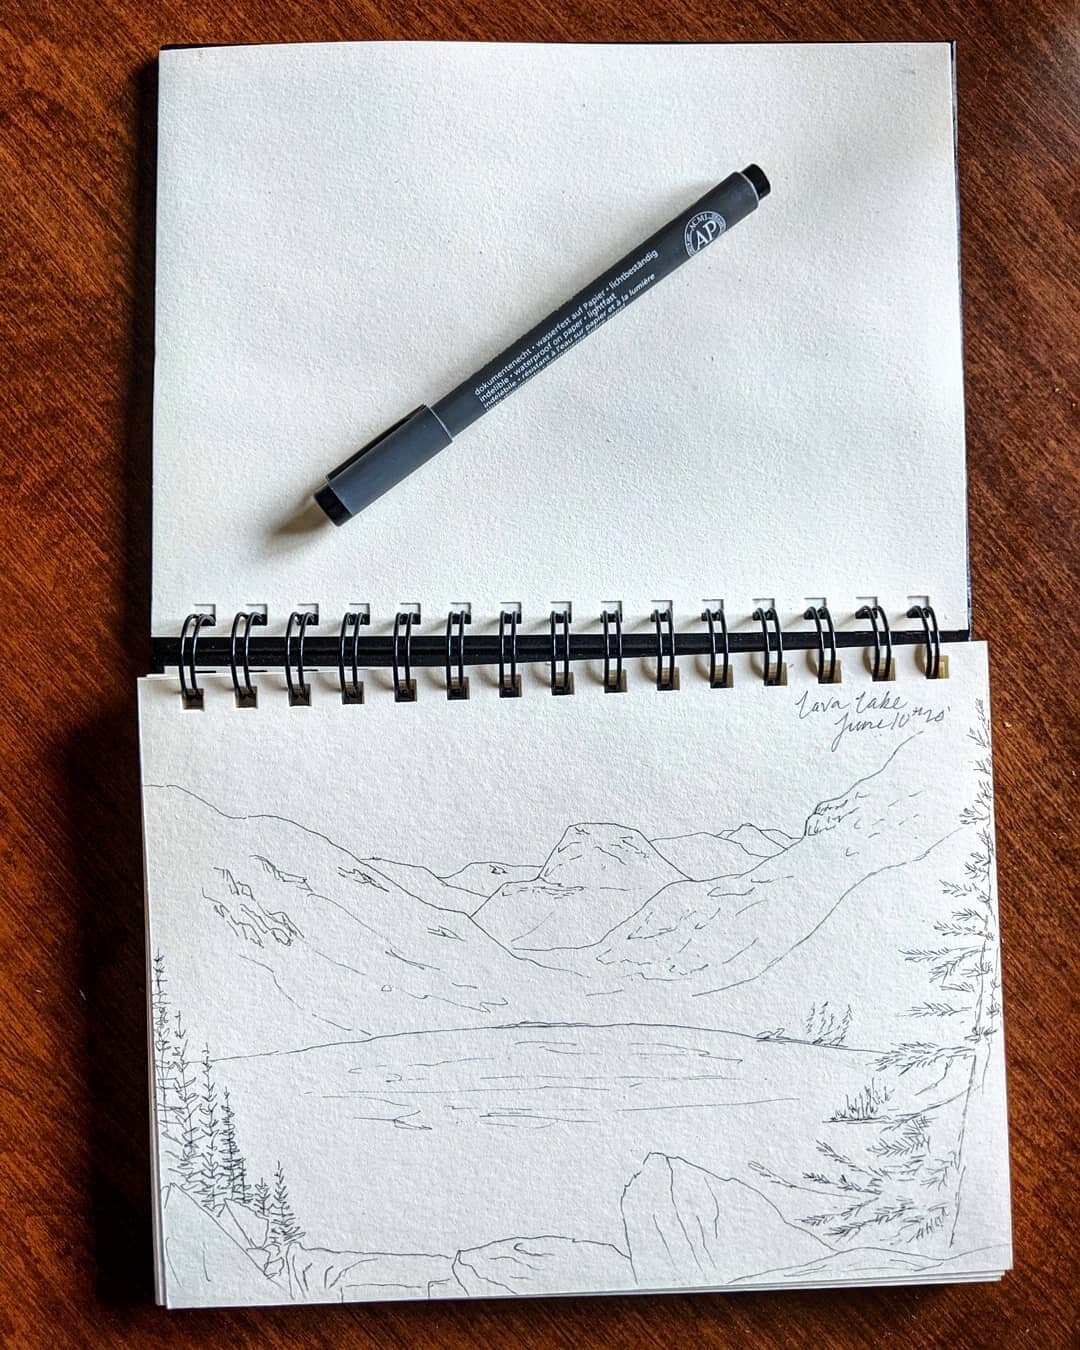 The best mornings are spent climbing mountains and creating ✏️🏔️
#montanamoments #getoutside #hike #artistofinstagram #sketching #mountainart #montanamountains #artist #art #draw #creativeminds